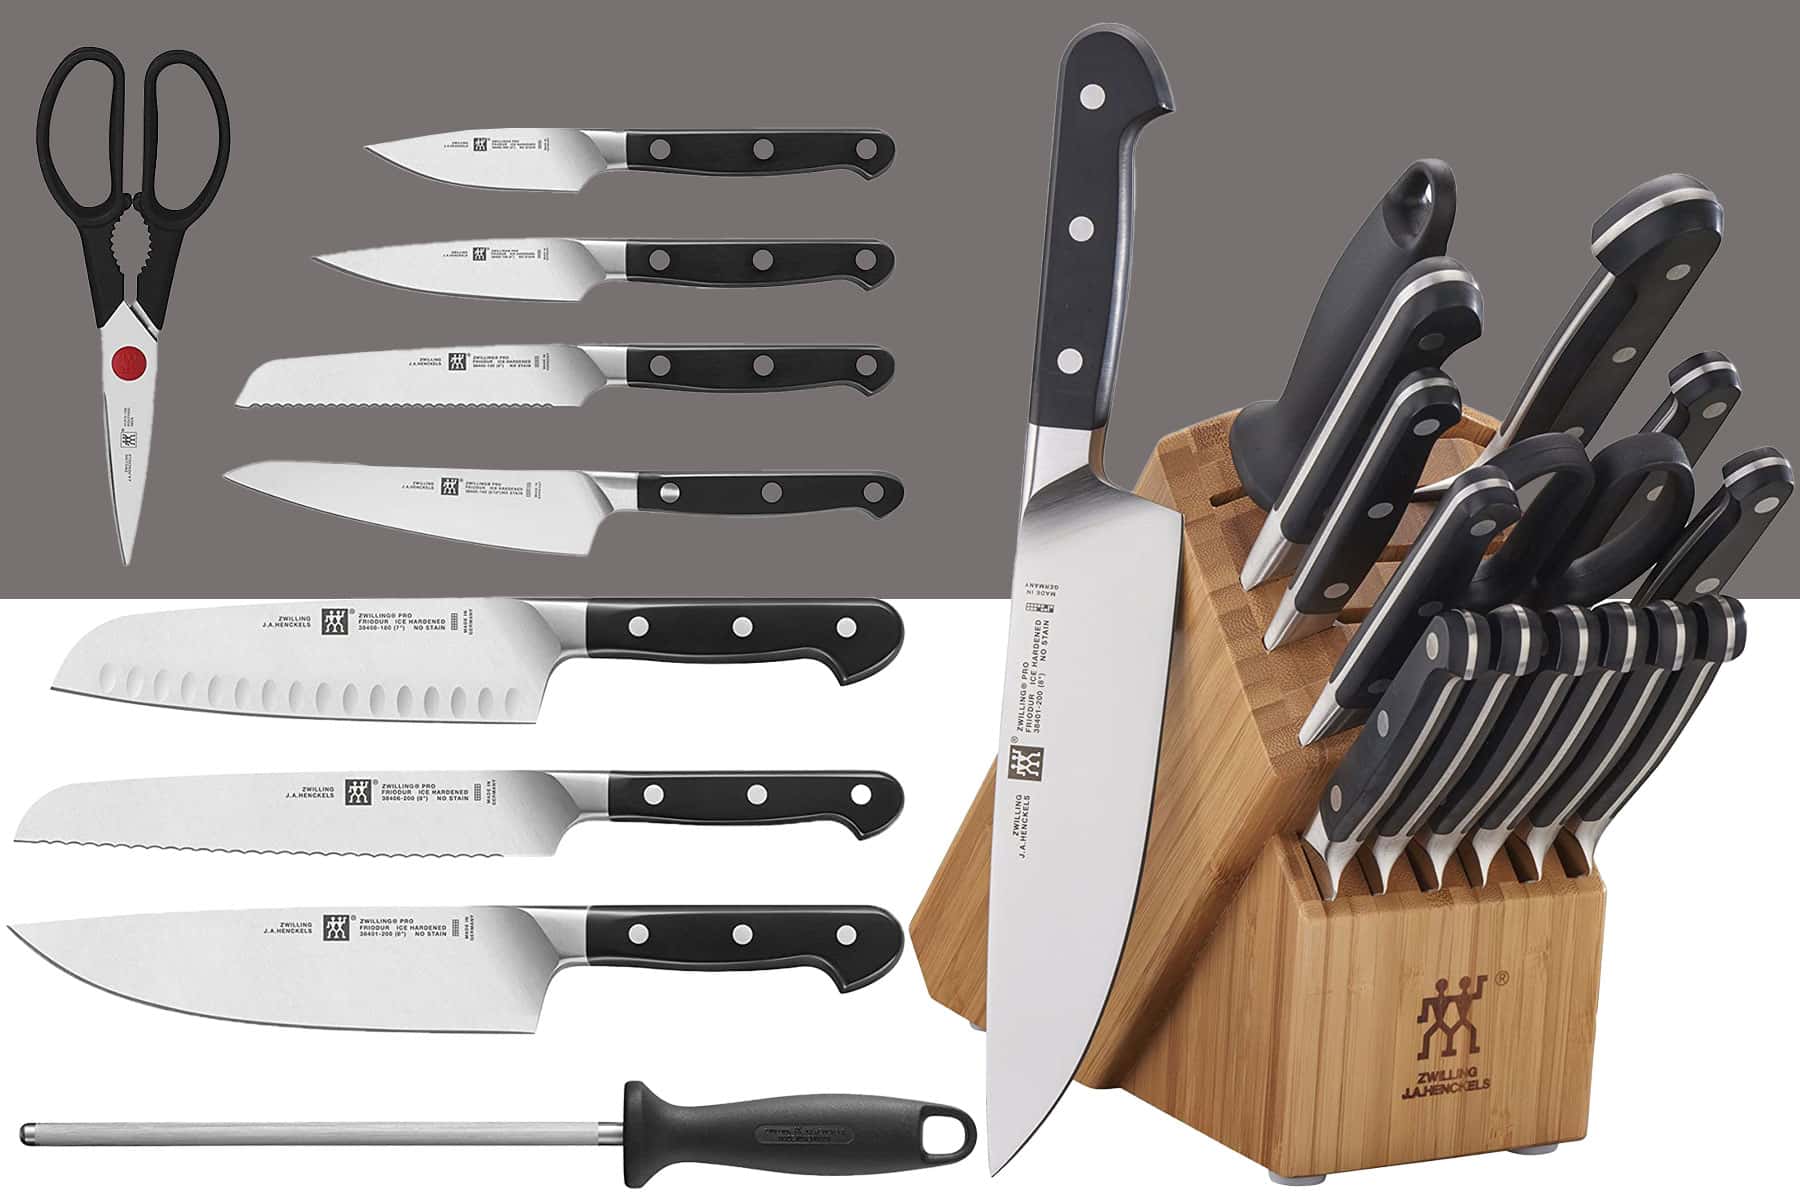 The Zwilling Pro 10 piece knife set knife set shown here with the hero knives and the shears and honing steel.